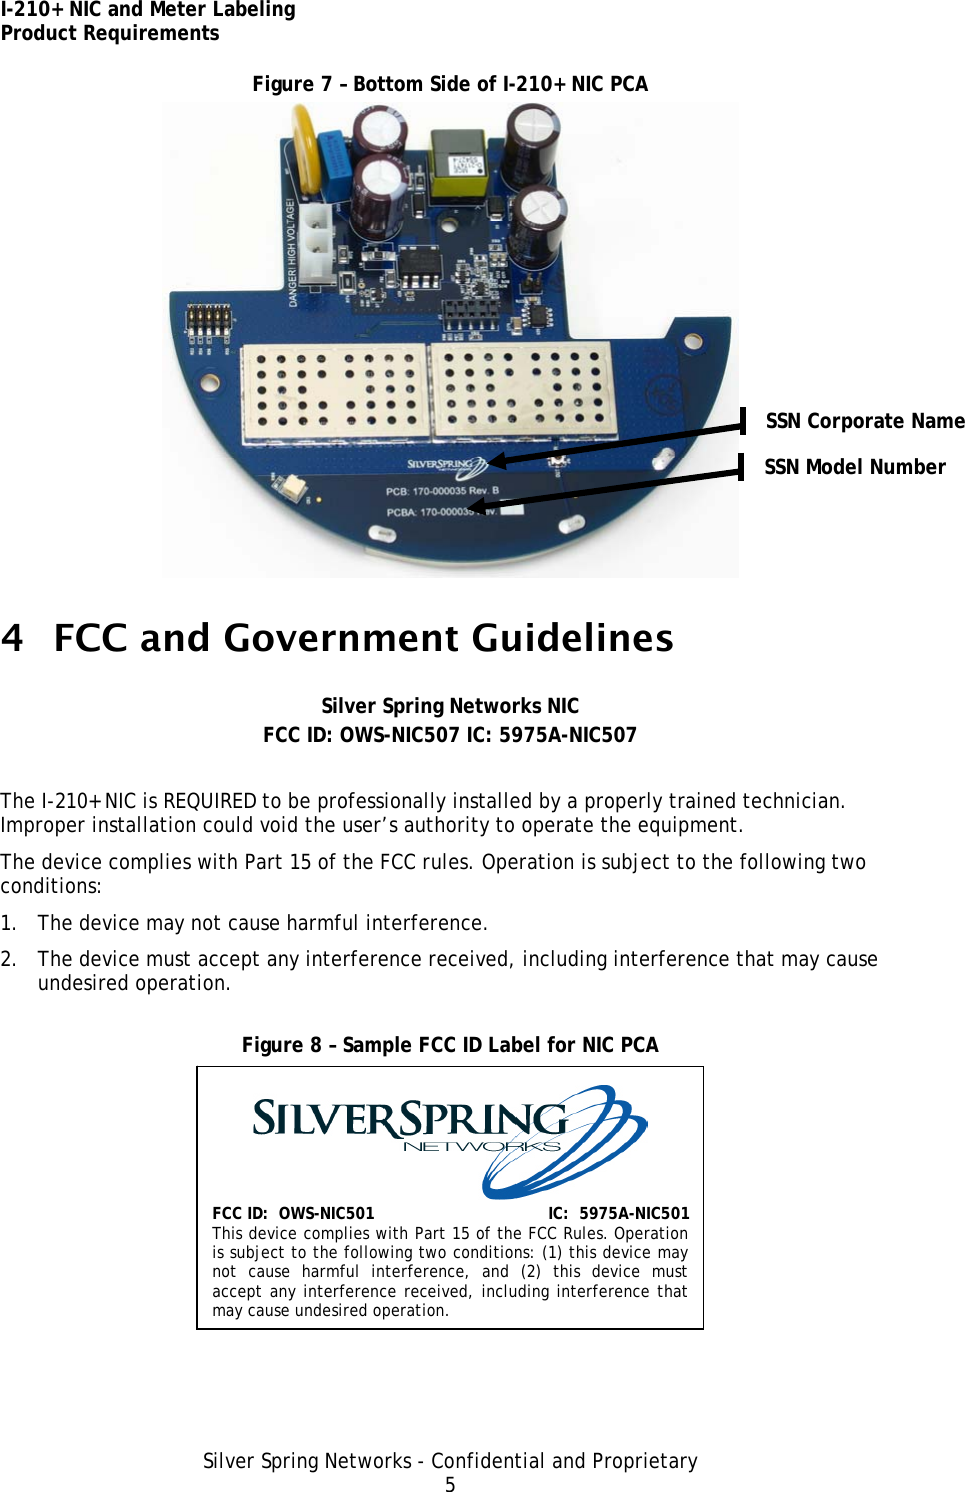 I-210+ NIC and Meter Labeling Product Requirements Silver Spring Networks - Confidential and Proprietary 5 Figure 7 – Bottom Side of I-210+ NIC PCA  4 FCC and Government Guidelines  Silver Spring Networks NIC FCC ID: OWS-NIC507 IC: 5975A-NIC507  The I-210+ NIC is REQUIRED to be professionally installed by a properly trained technician. Improper installation could void the user’s authority to operate the equipment. The device complies with Part 15 of the FCC rules. Operation is subject to the following two conditions: 1. The device may not cause harmful interference. 2. The device must accept any interference received, including interference that may cause undesired operation. Figure 8 – Sample FCC ID Label for NIC PCA   FCC ID:  OWS-NIC501 IC:  5975A-NIC501 This device complies with Part 15 of the FCC Rules. Operation is subject to the following two conditions: (1) this device may not cause harmful interference, and (2) this device must accept any interference received, including interference that may cause undesired operation. SSN Corporate Name SSN Model Number 